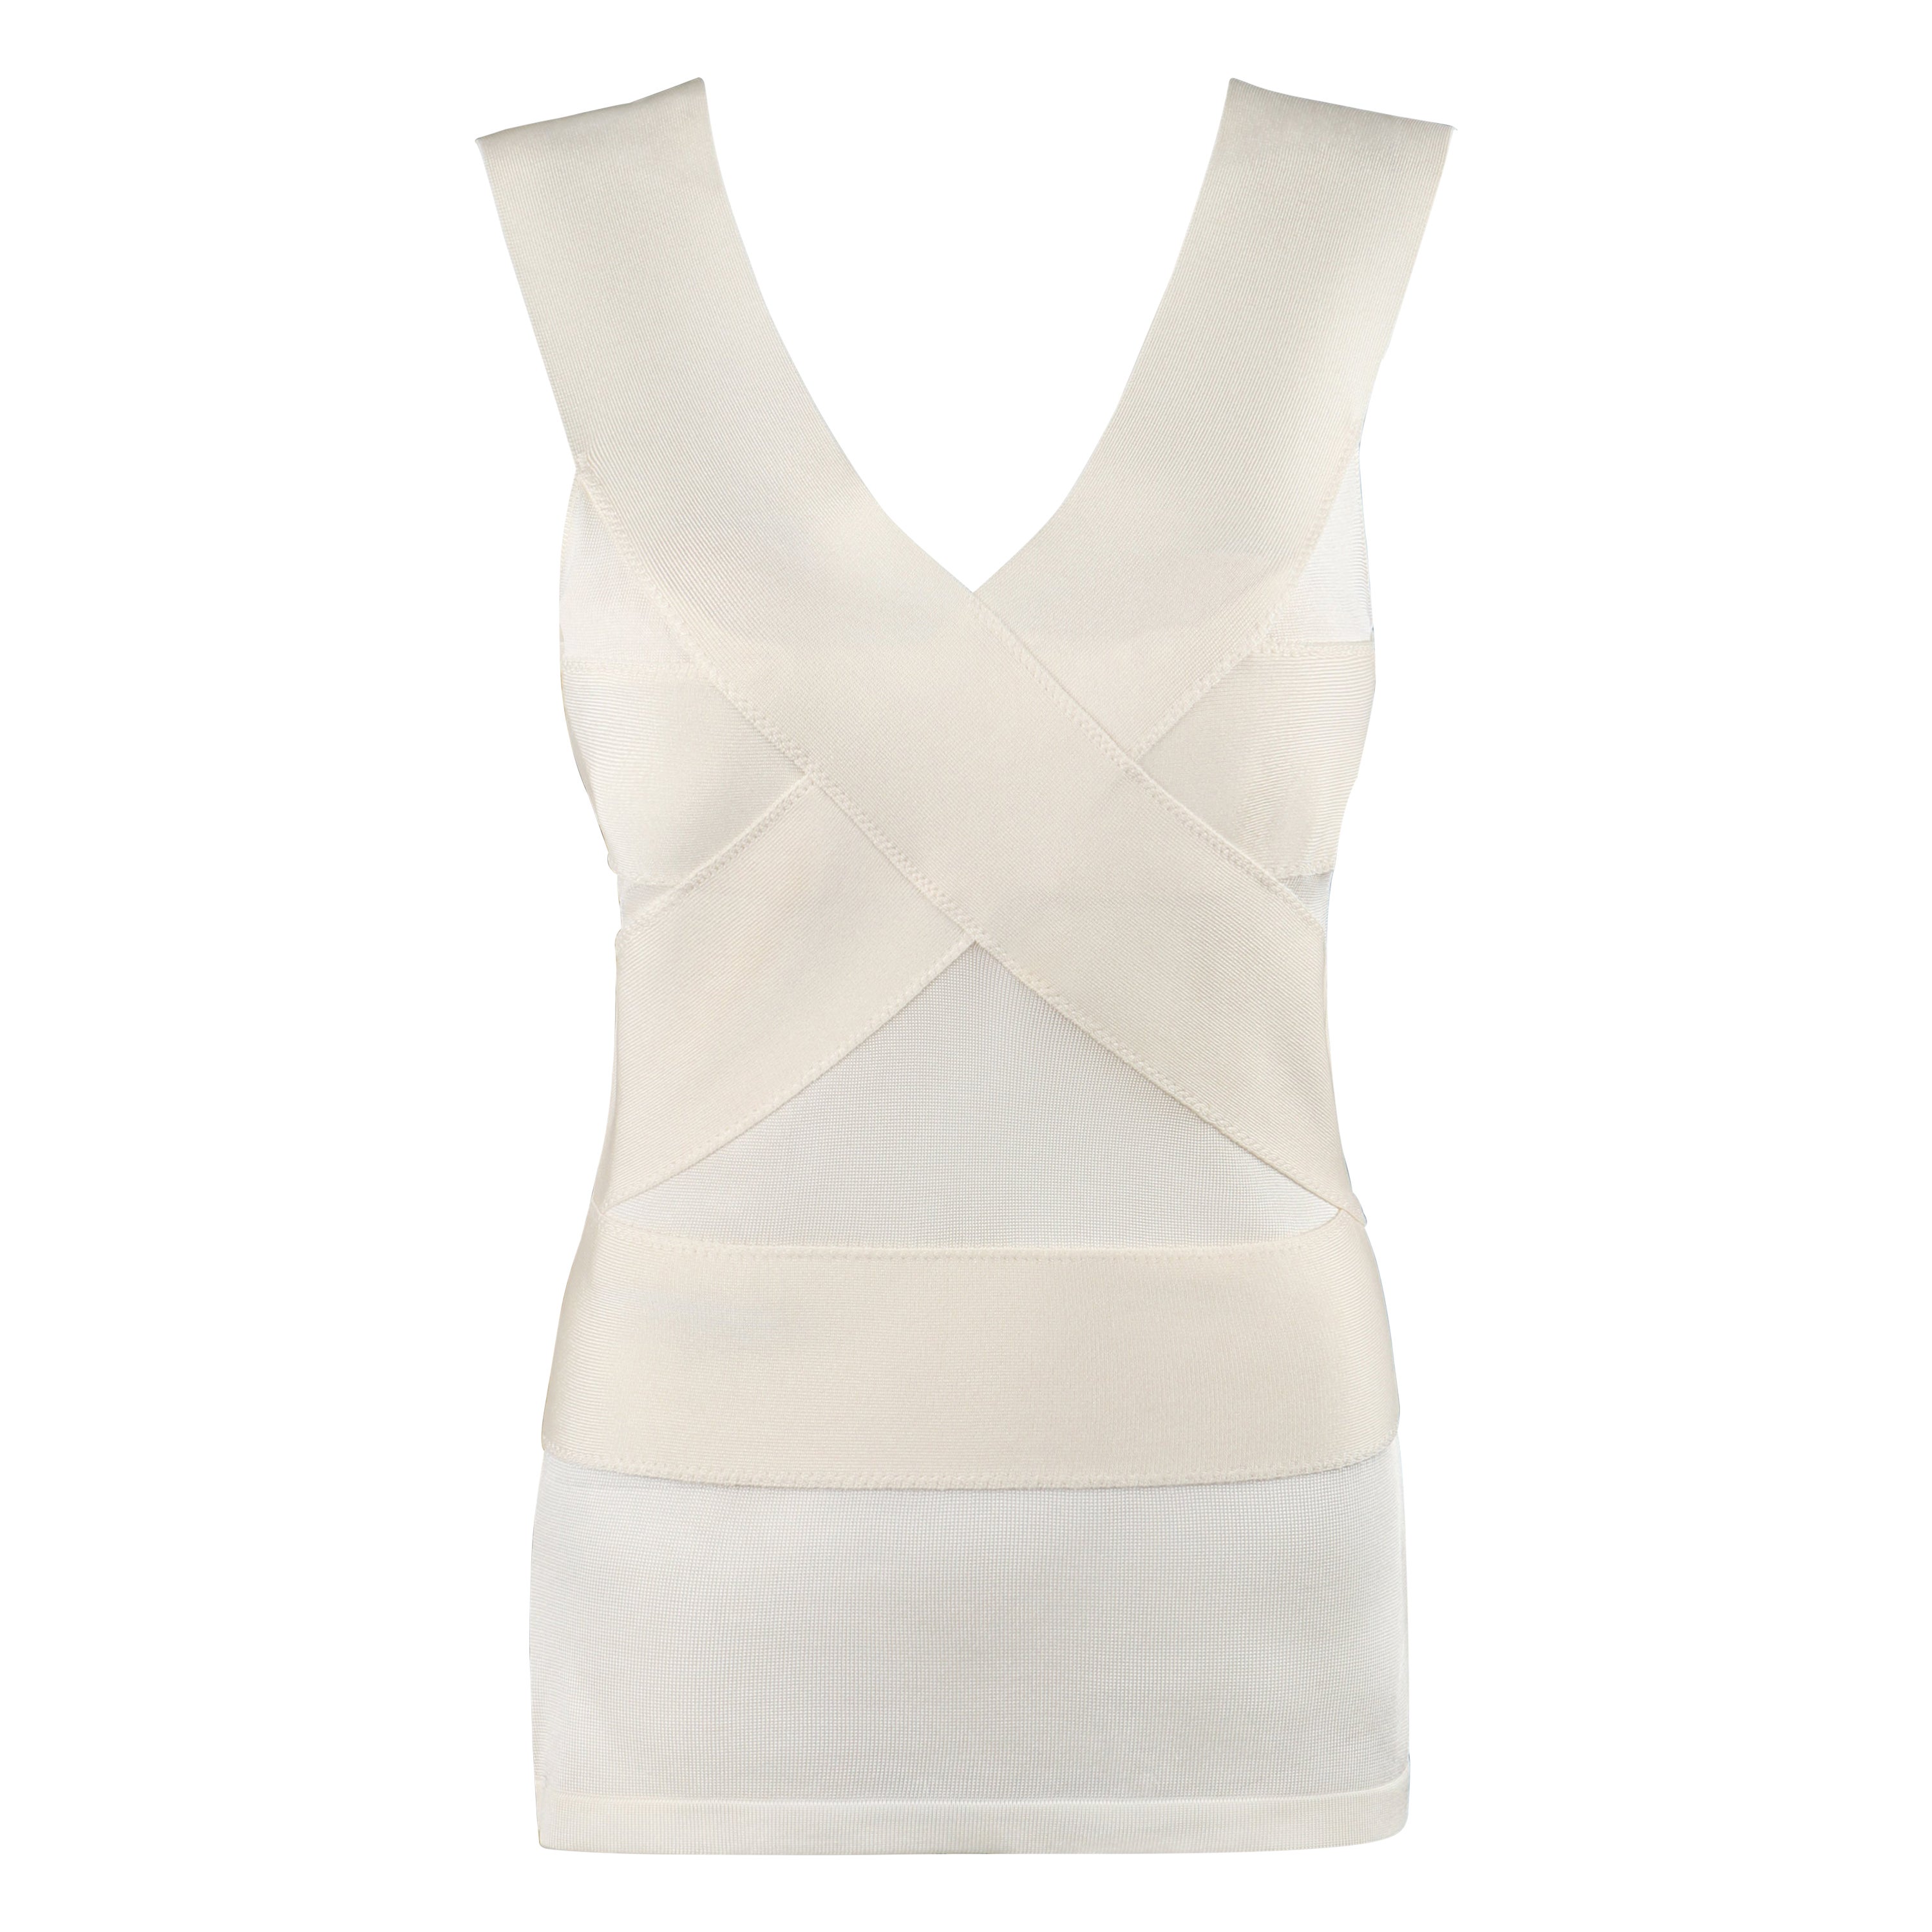 ALEXANDER McQUEEN c.2007 Ivory Stretch Knit Semi-Sheer Sleeveless Bandage Top For Sale